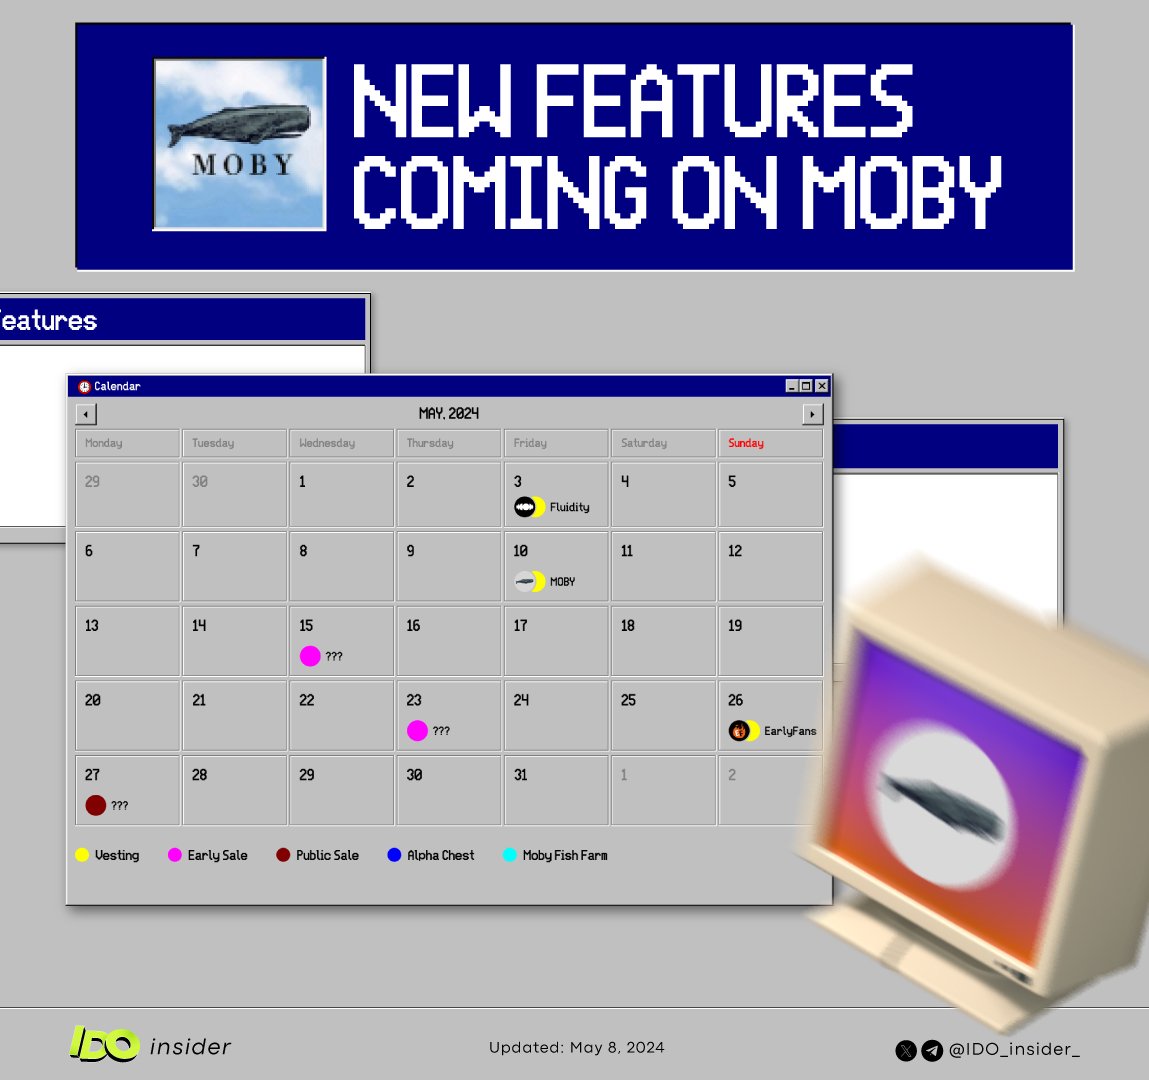 The new features on MOBY are ready to be introduced to the community, with dates set for the 15th, 23rd, and 27th of this month 👀🔥

Follow @MobyHQ and turn on notification !
Make ICOs great again 🐳

Stay connected! Follow us for all the latest updates
#MOBY #NewFeatures #ICO